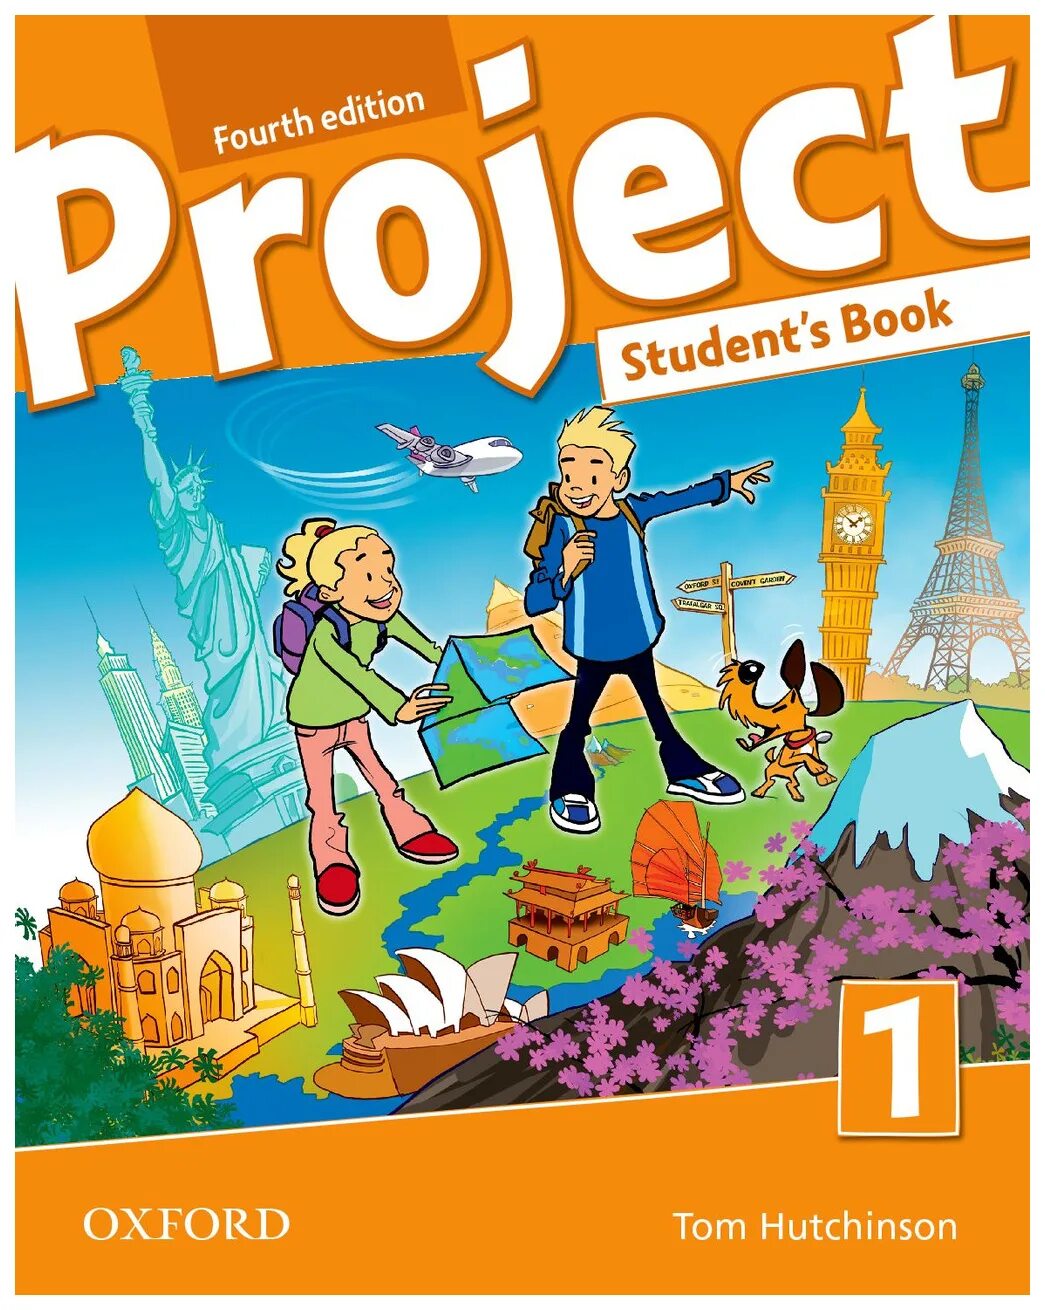 Project 1 fourth Edition students book. Project 1 4th Edition. Project student book4 fourth Edition Workbook book. Рабочая тетрадь Project 1 Oxford Tom Hutchinson. Project 1.2